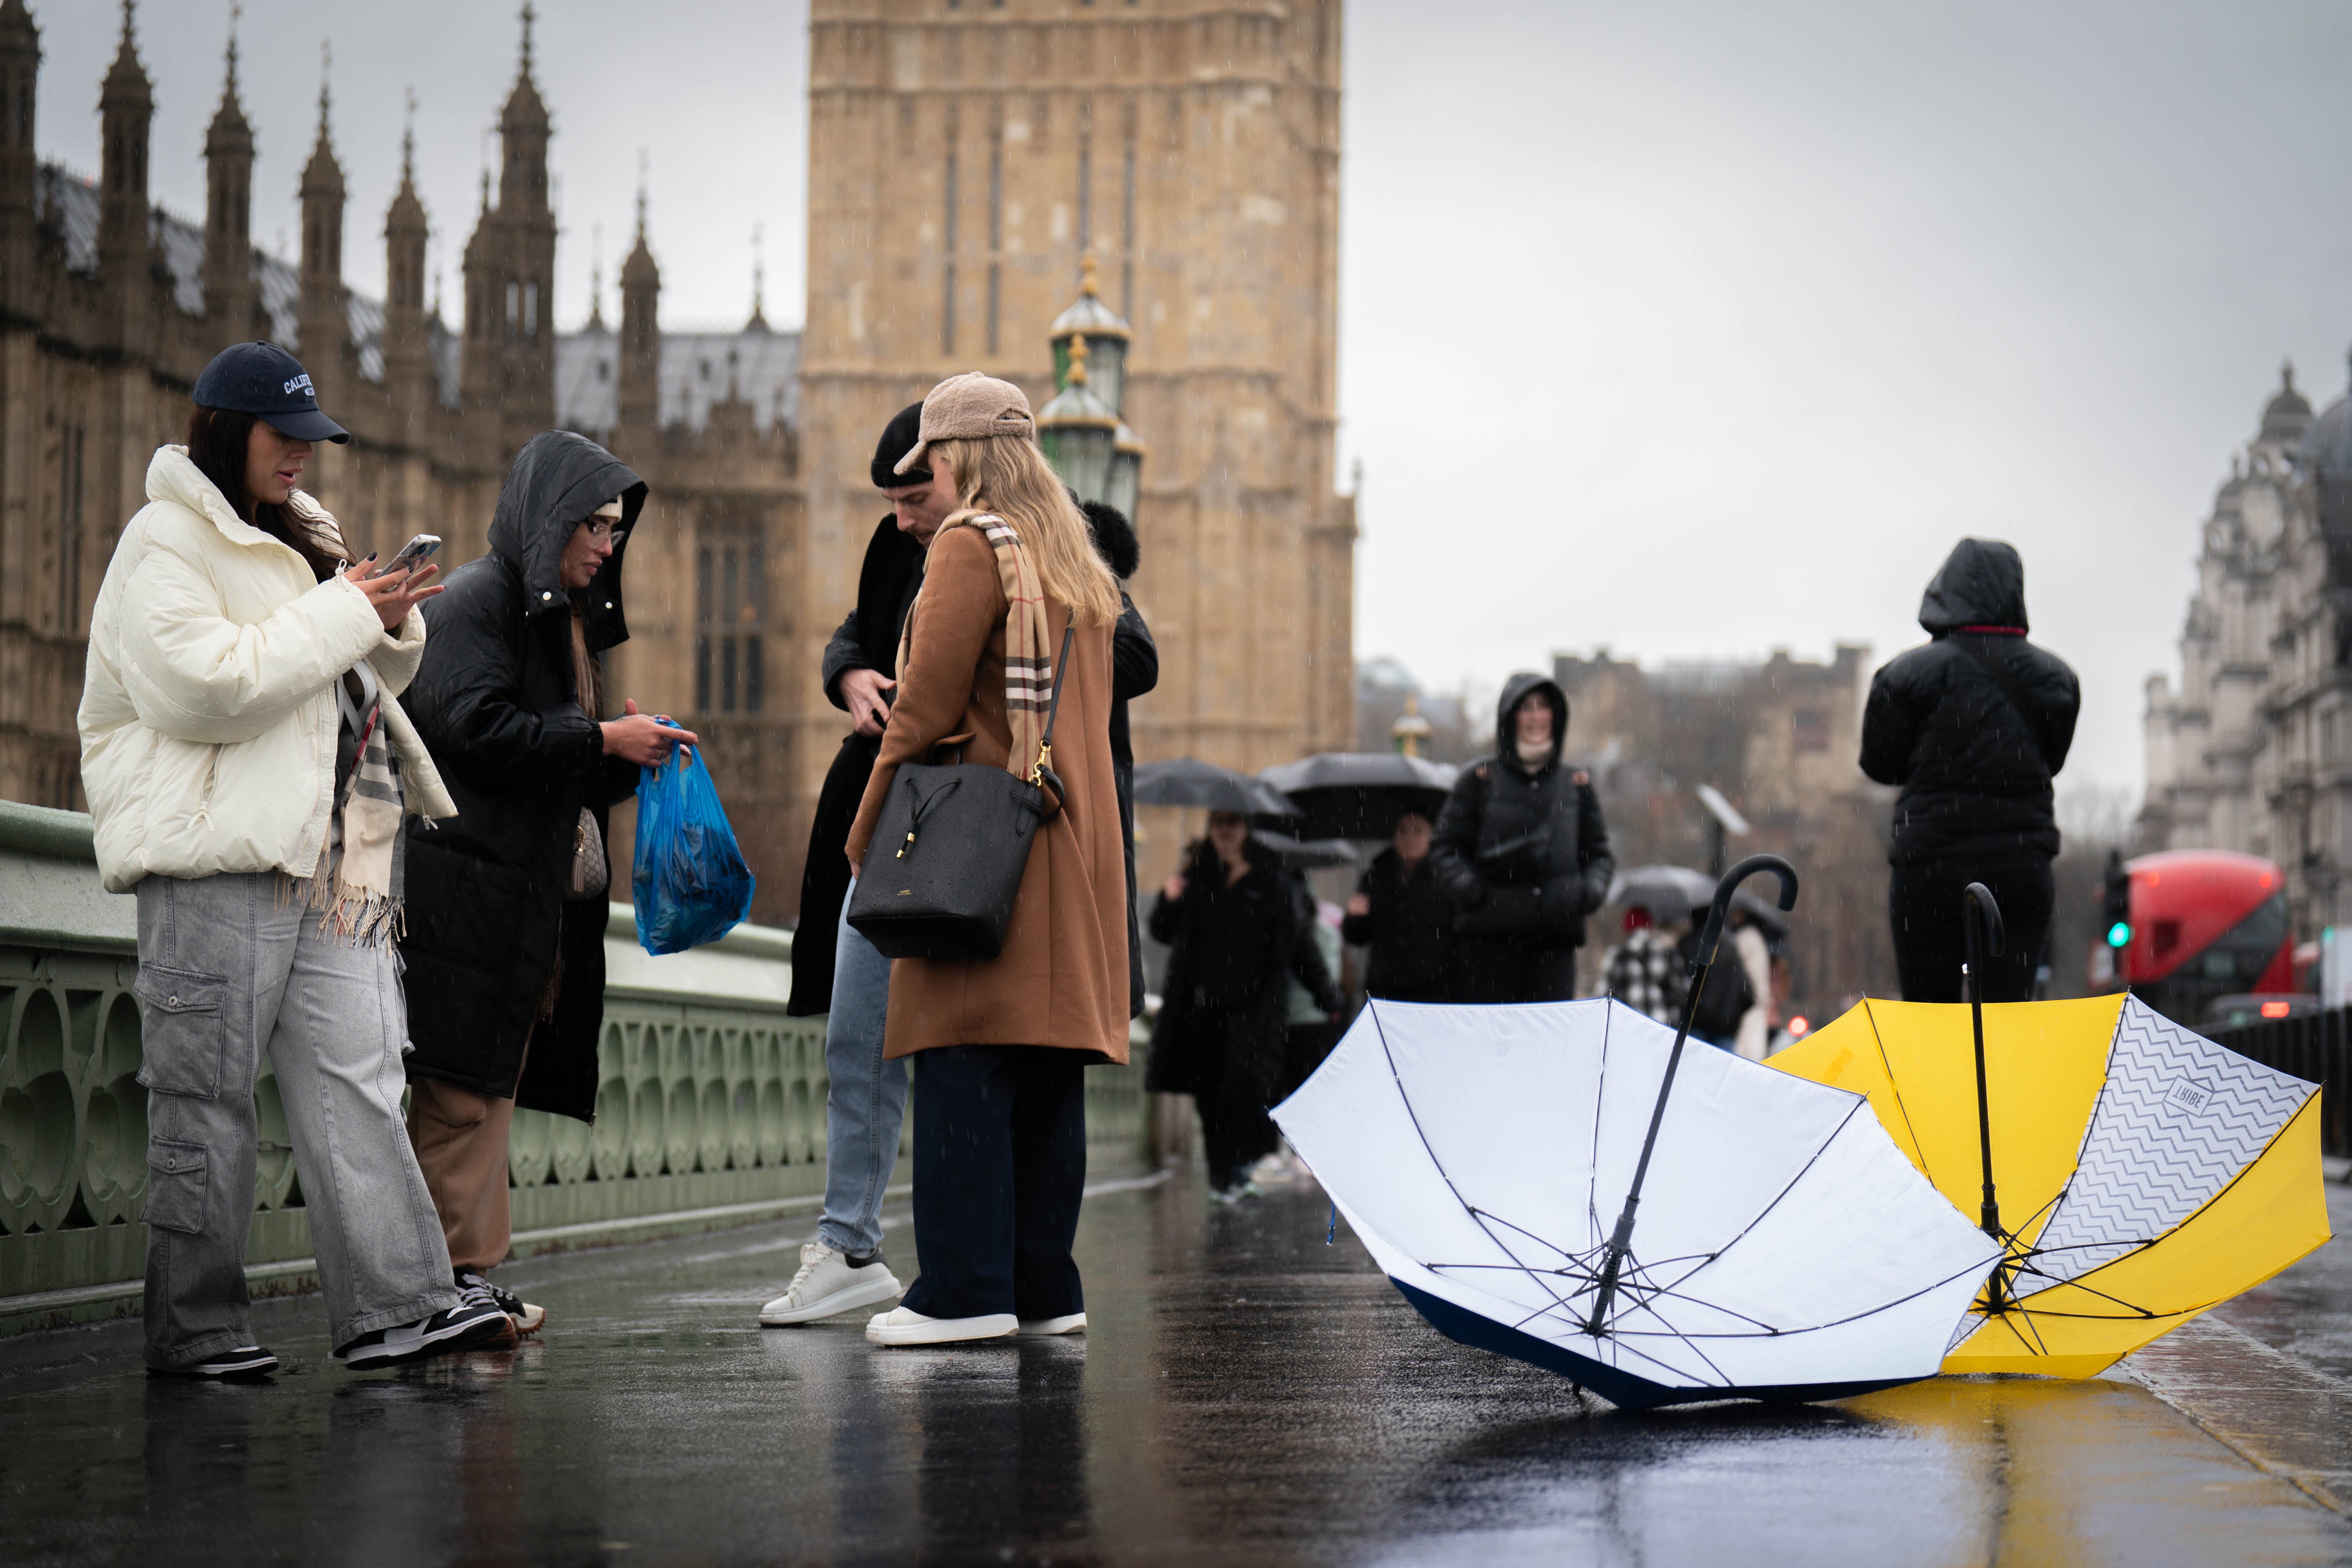 People on Westminster Bridge, central London in the rain